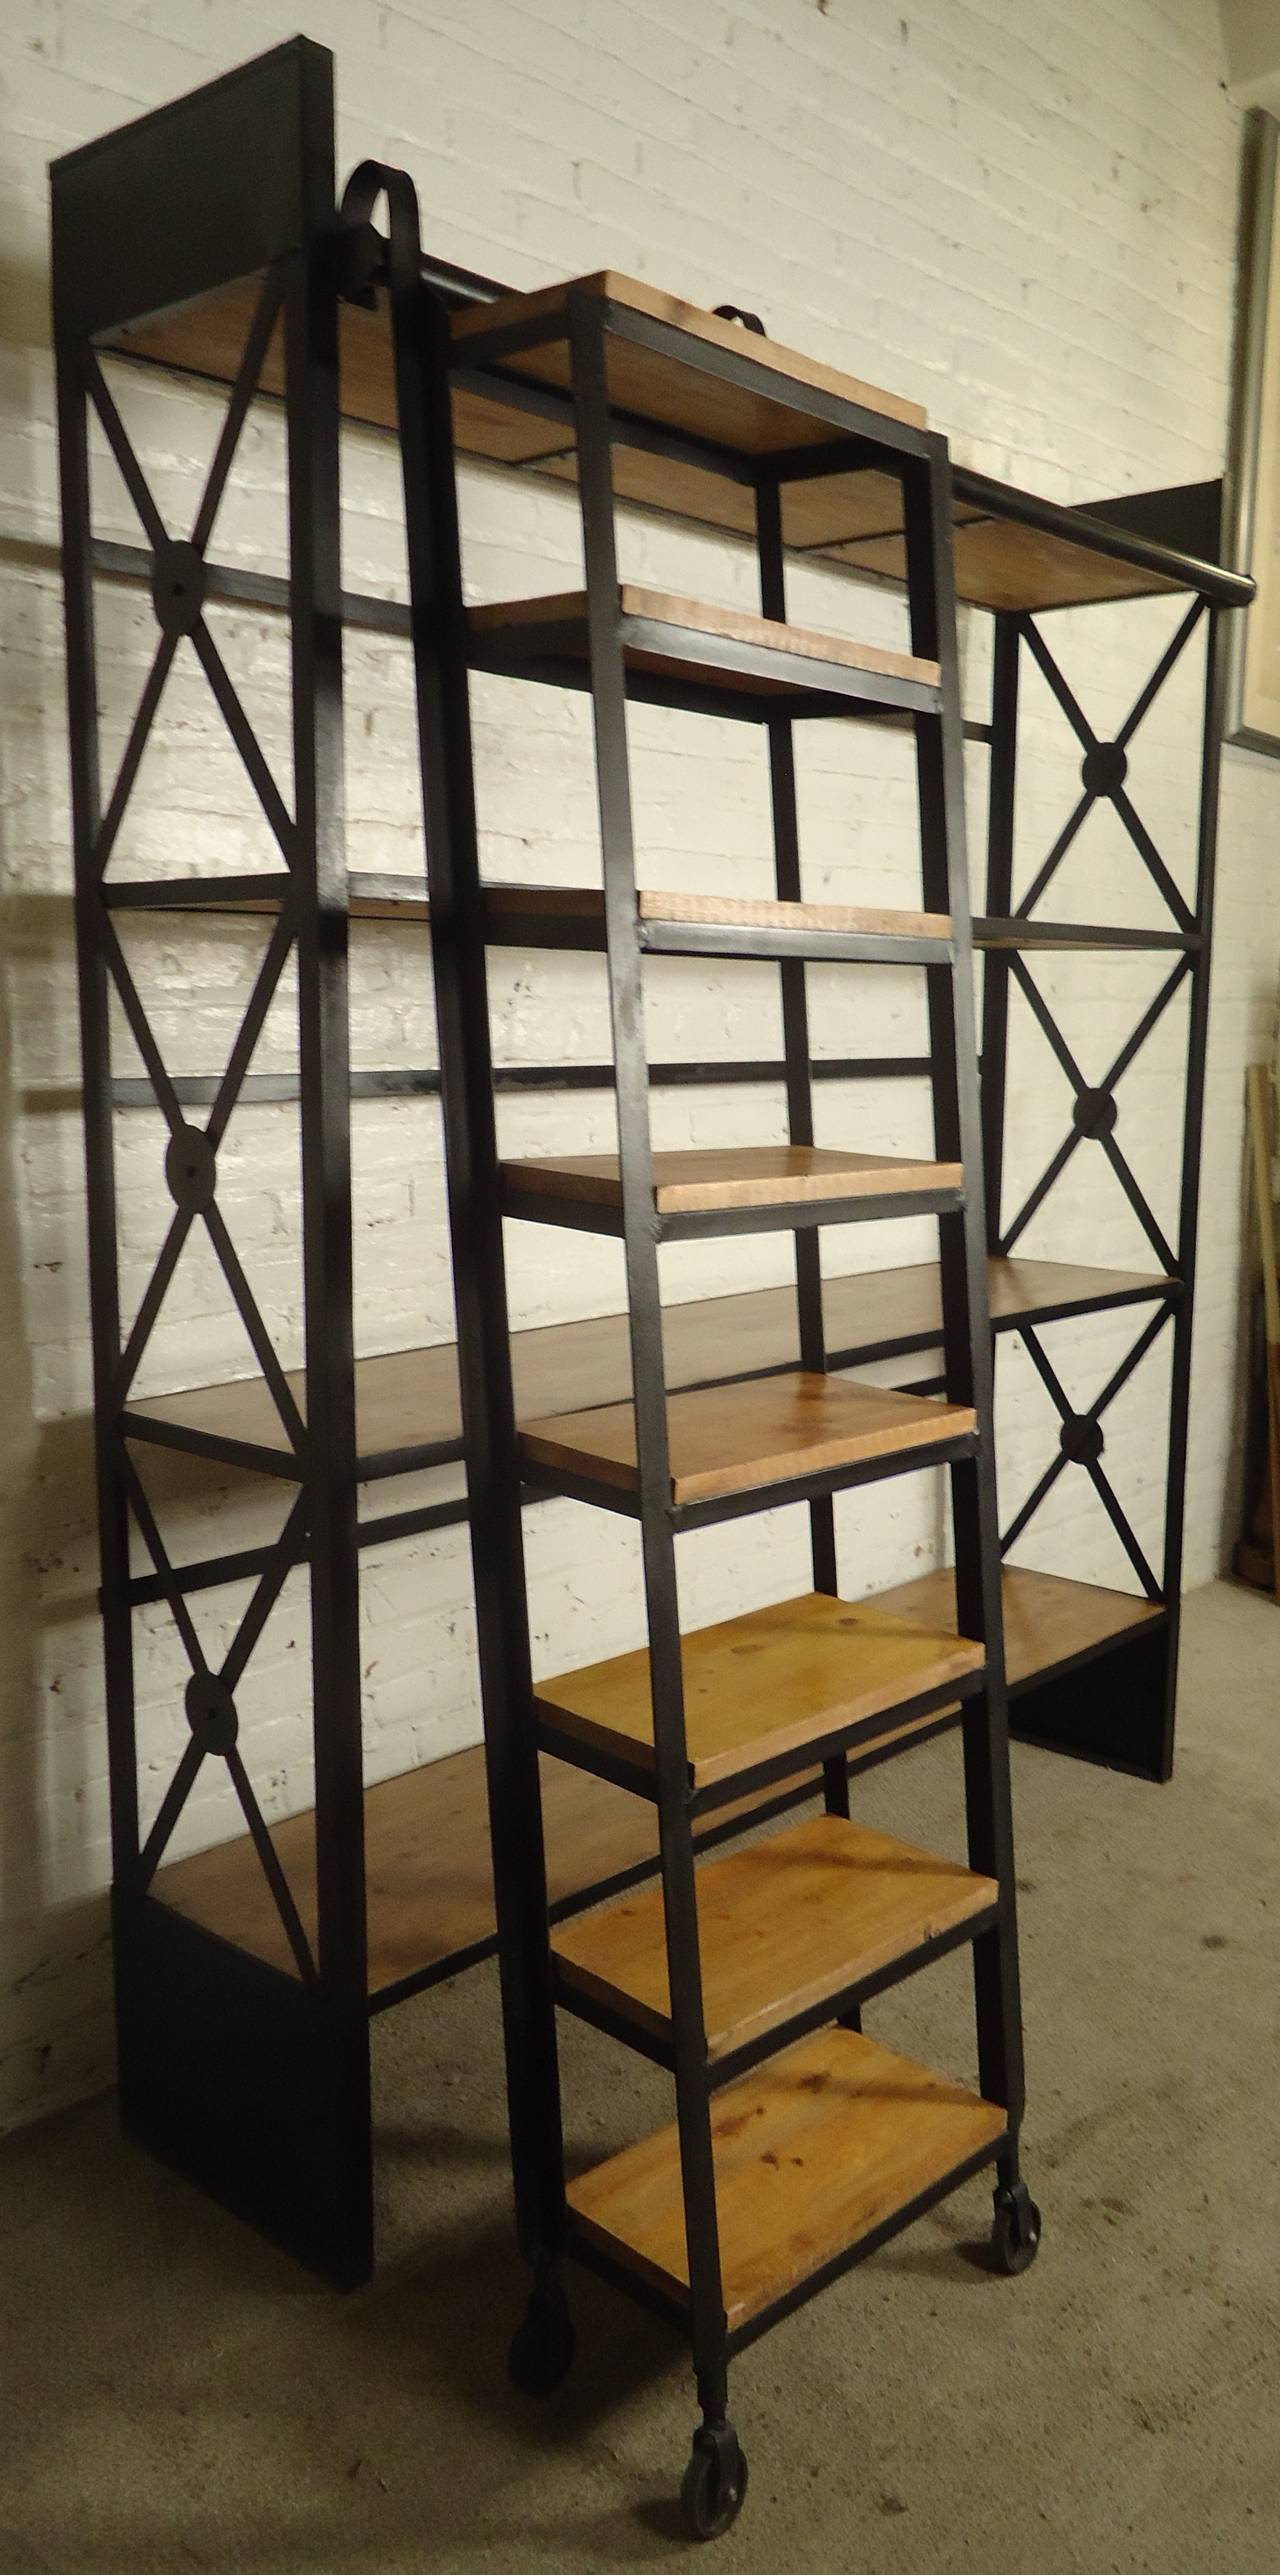 American Industrial Wood and Iron Shelving Unit with Sliding Ladder